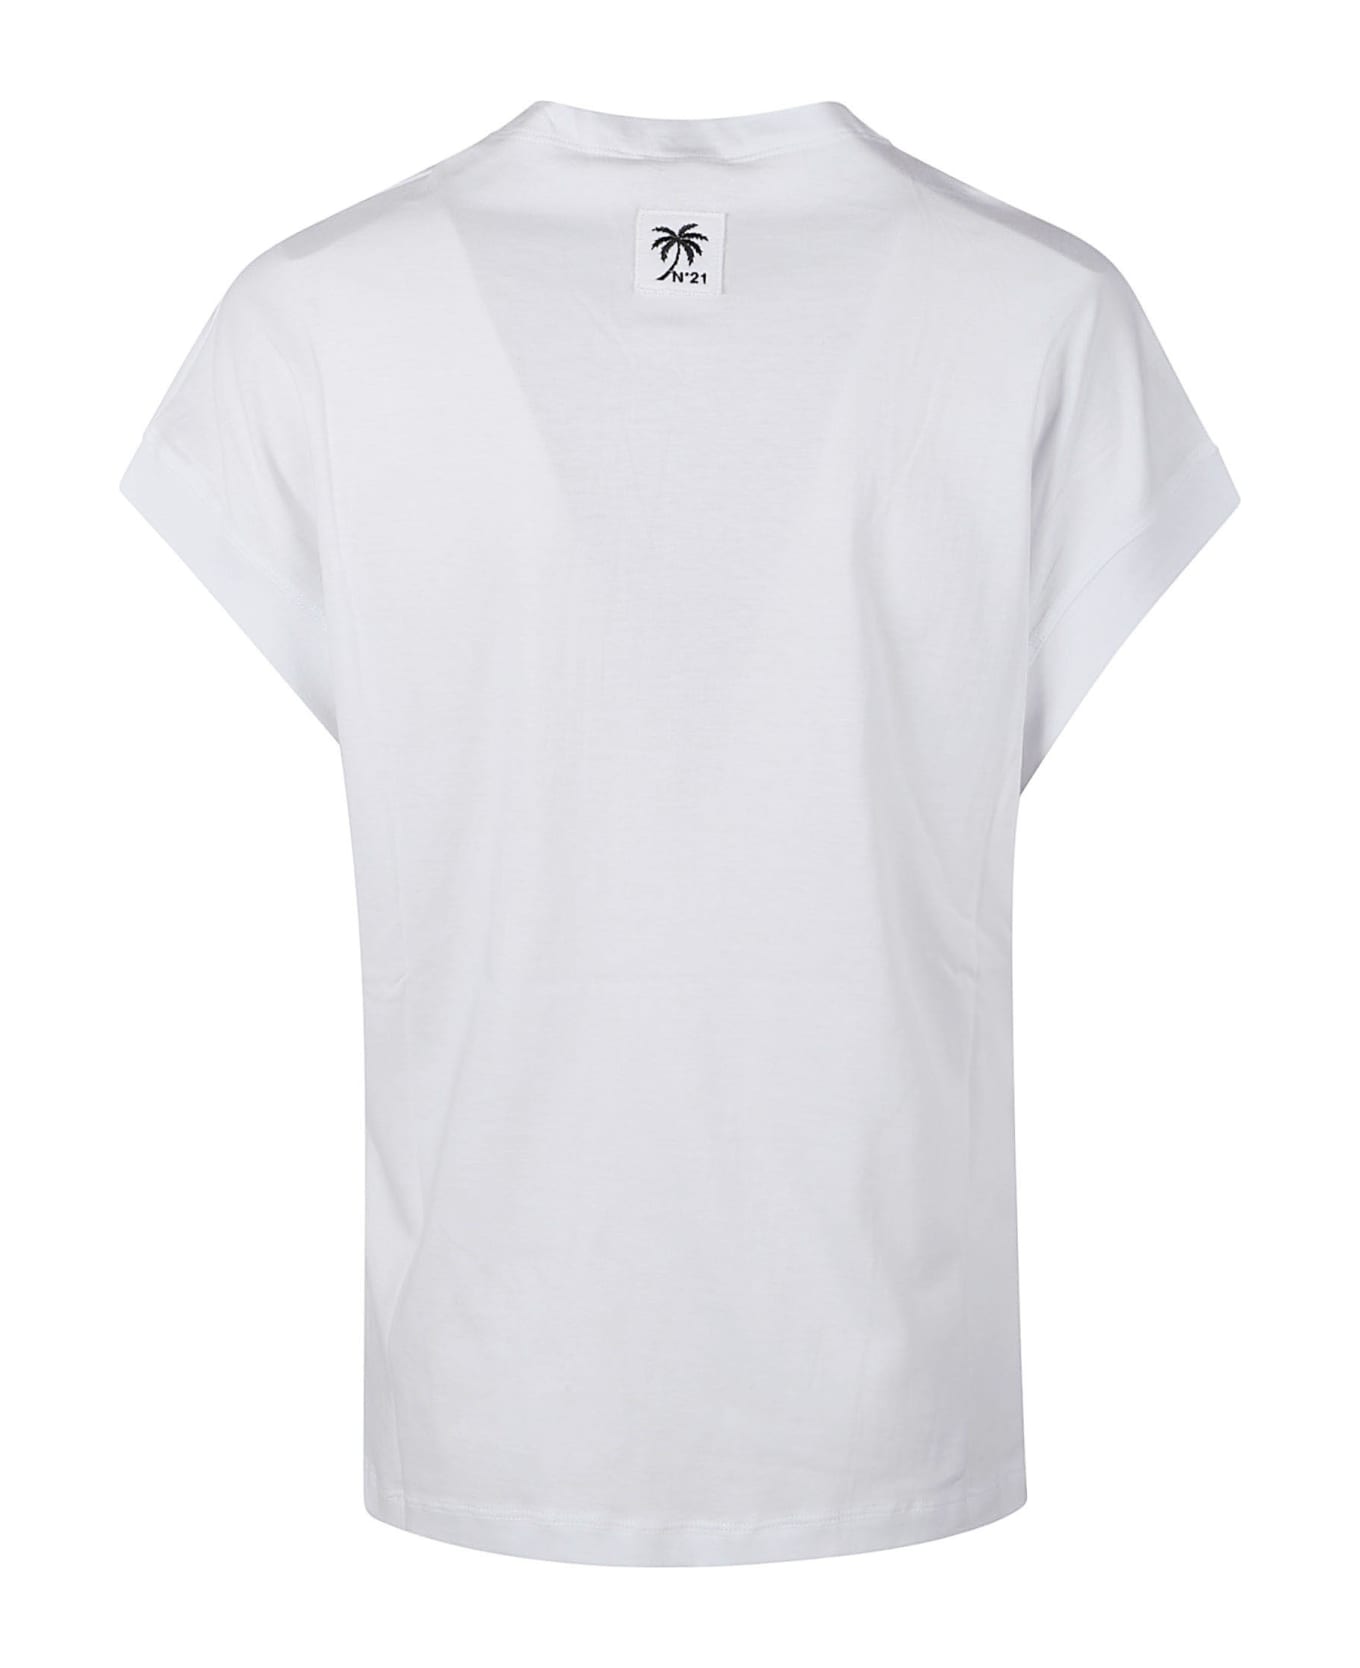 N.21 Logo Patched Wrap Front T-shirt - bianco ottico